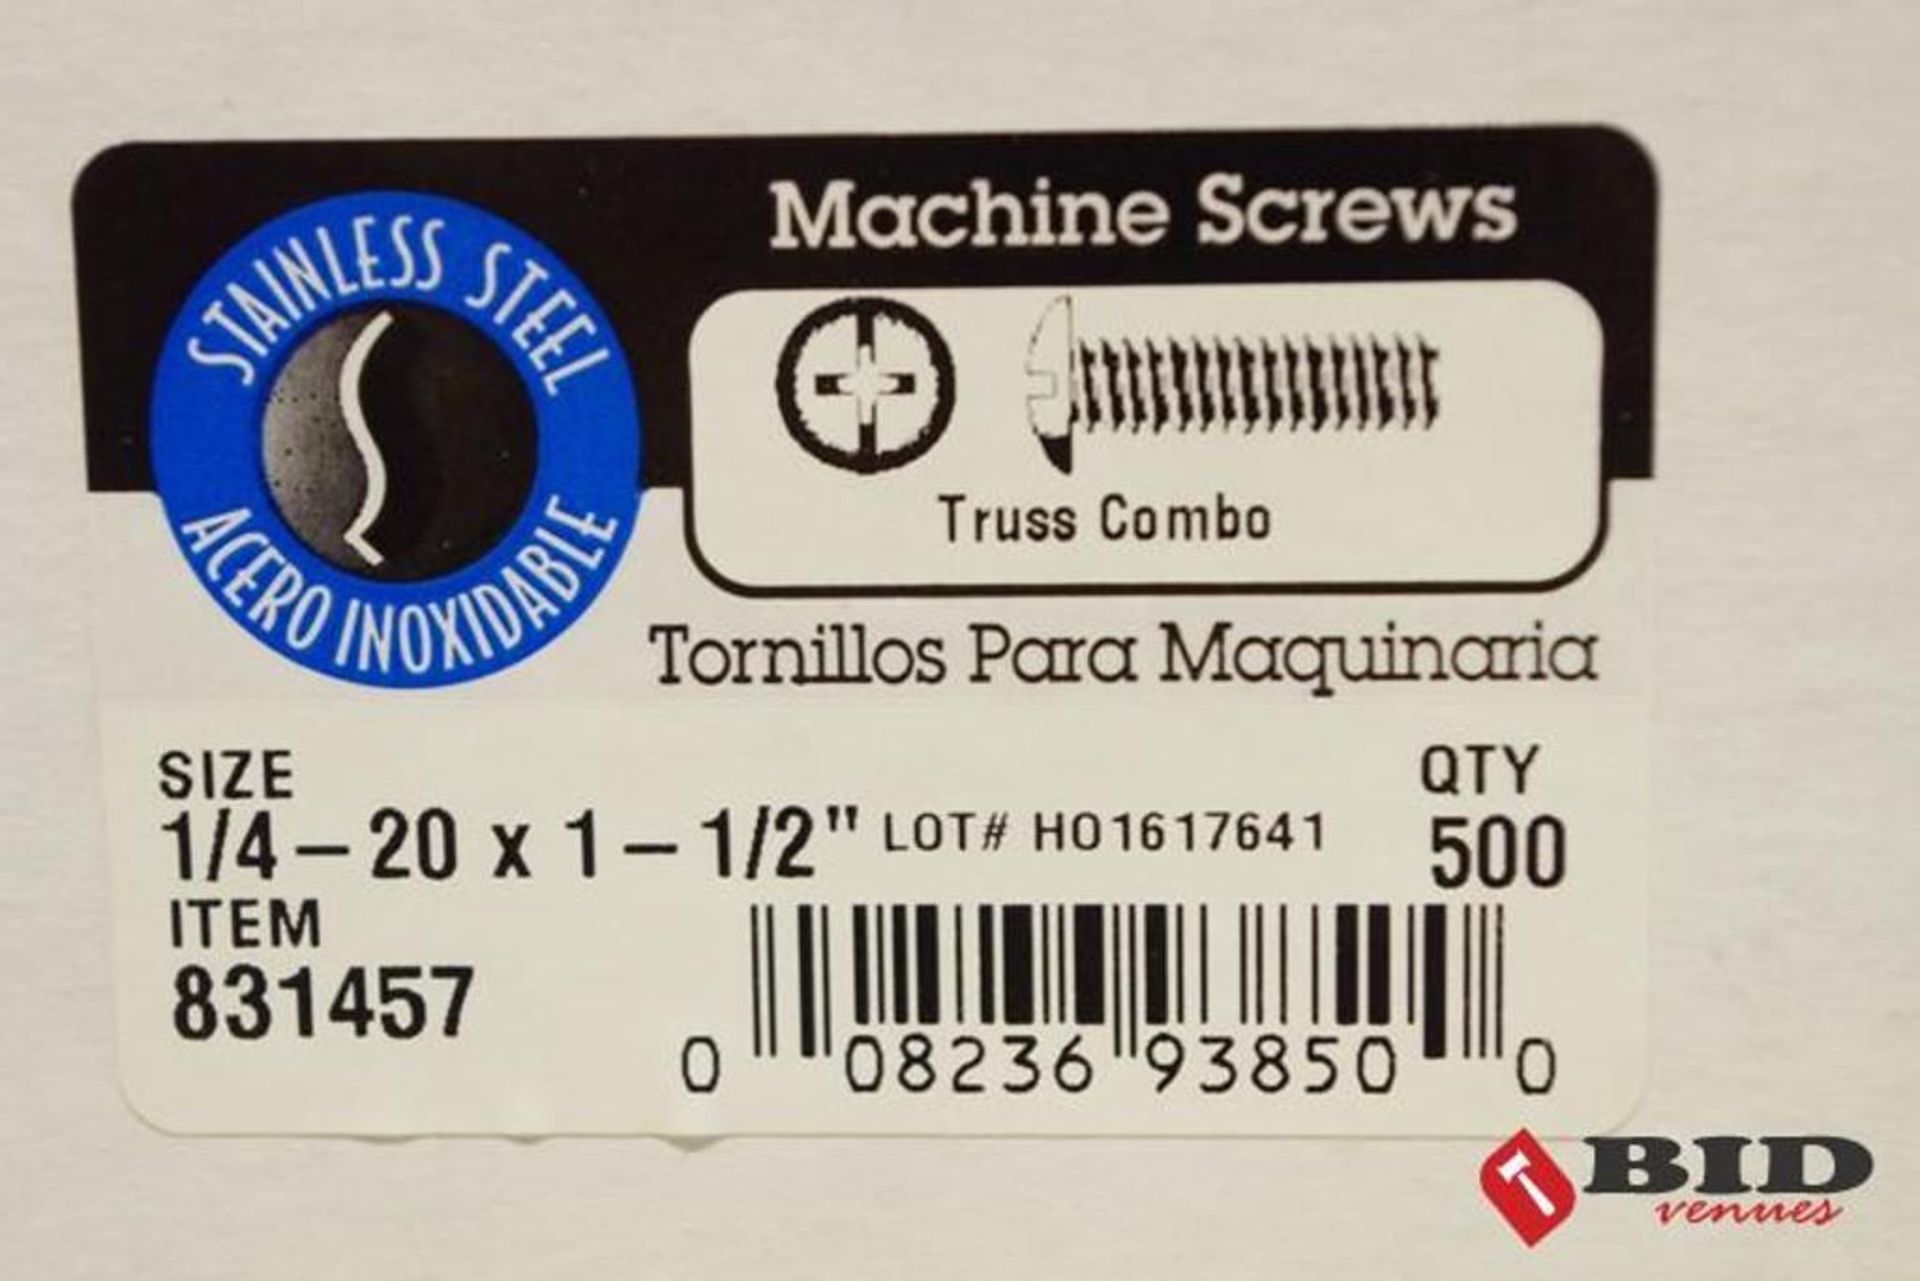 (500) HILLMAN Stainless Steel Machine Screws Size 1/4 - 20 x 1-1/2 in. (1 Box of 500) - Image 2 of 3